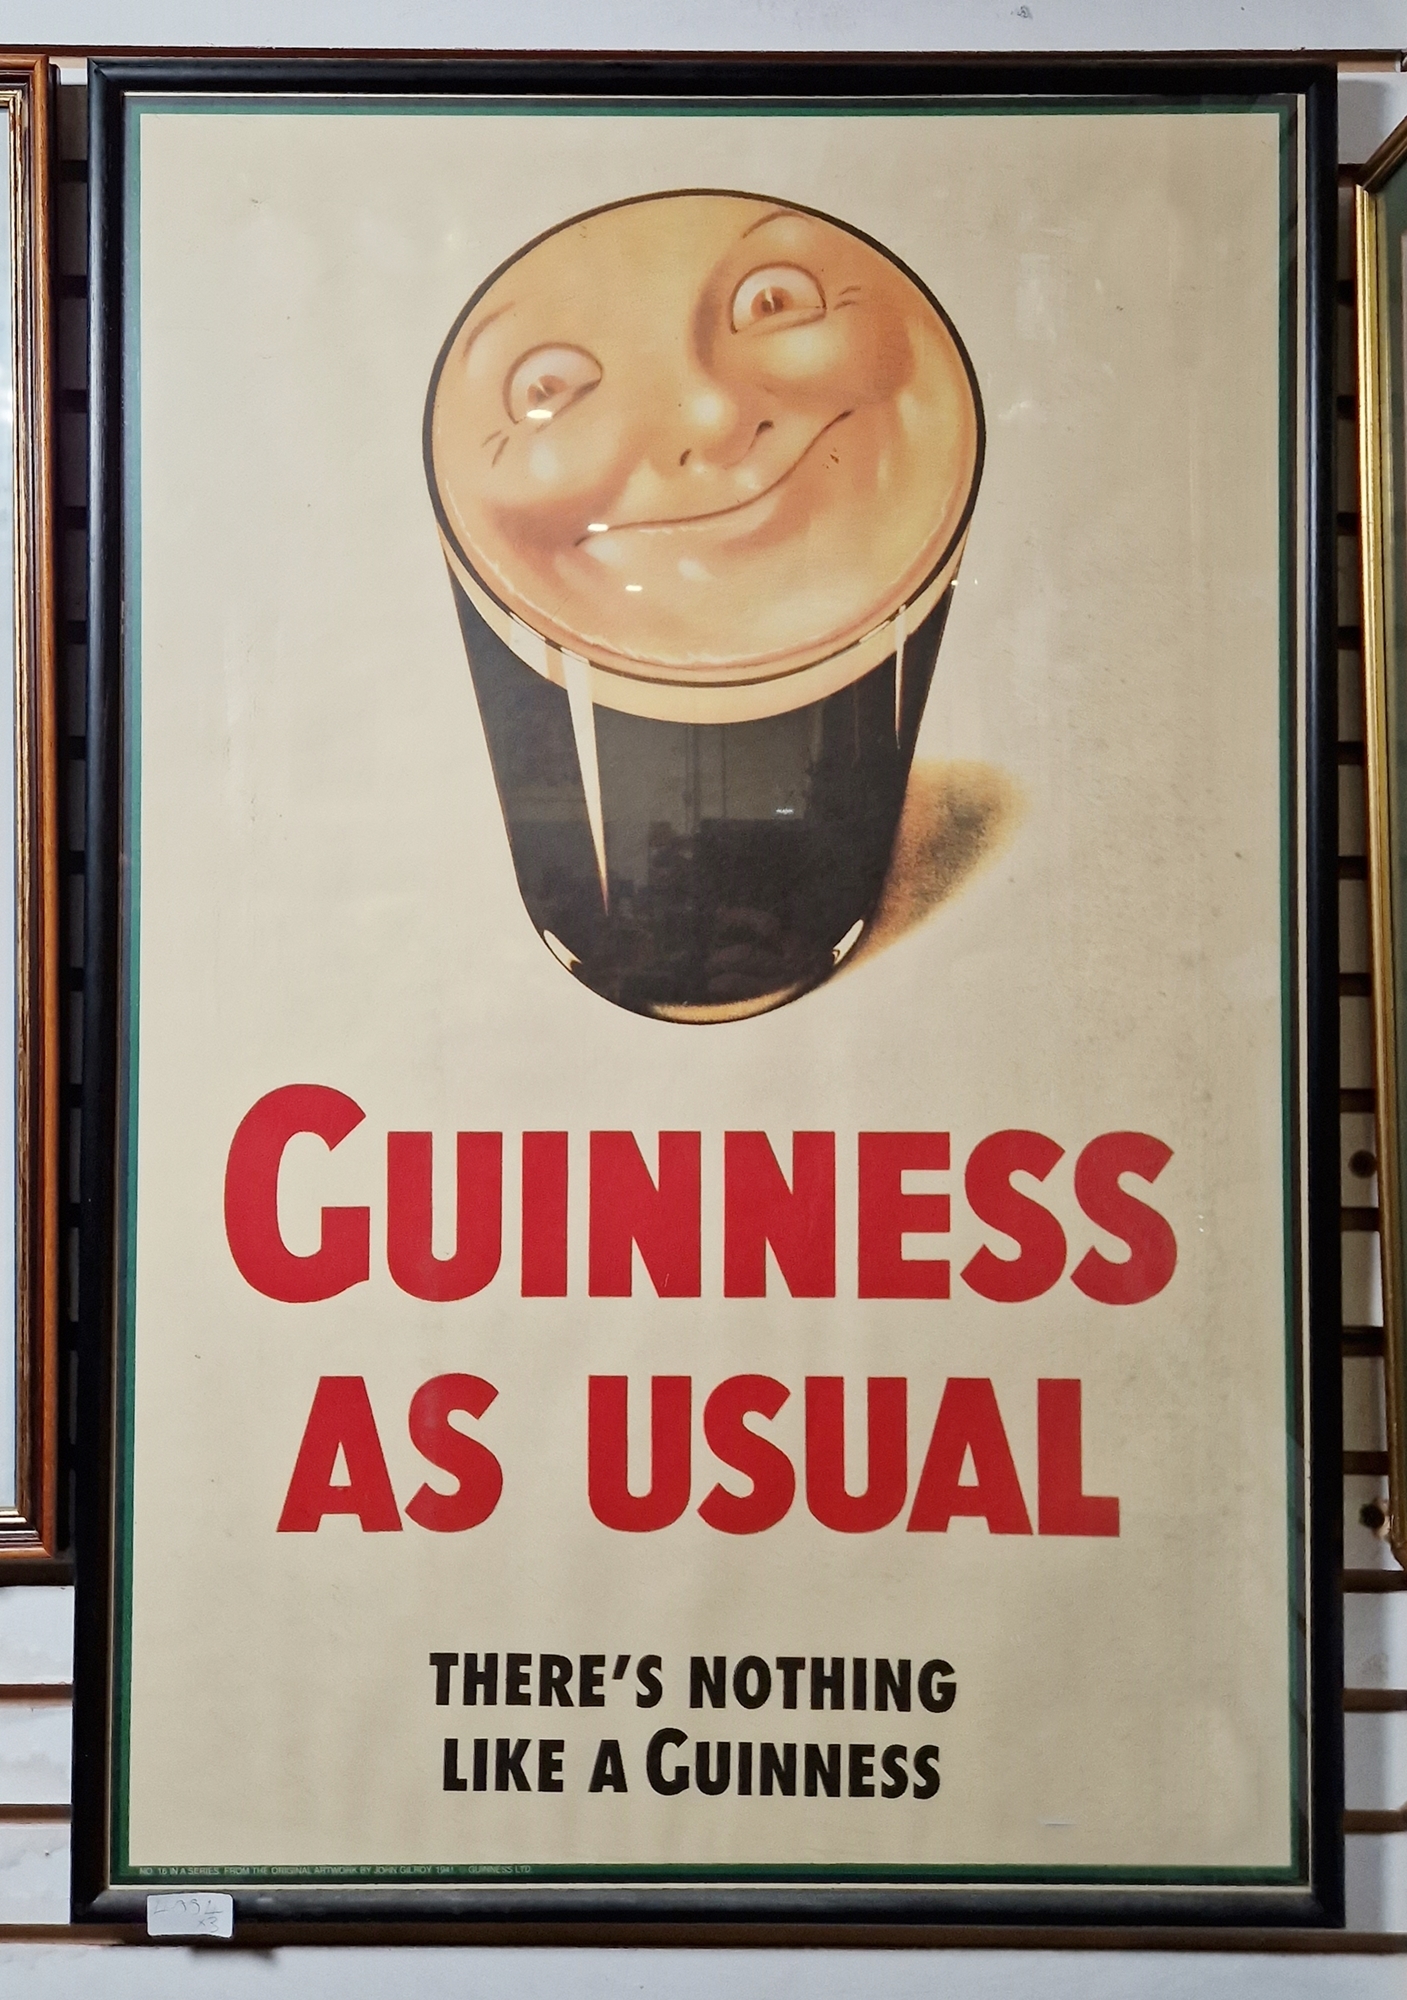 Artwork by John Gilroy, Two Guinness advertising posters, Made of posters